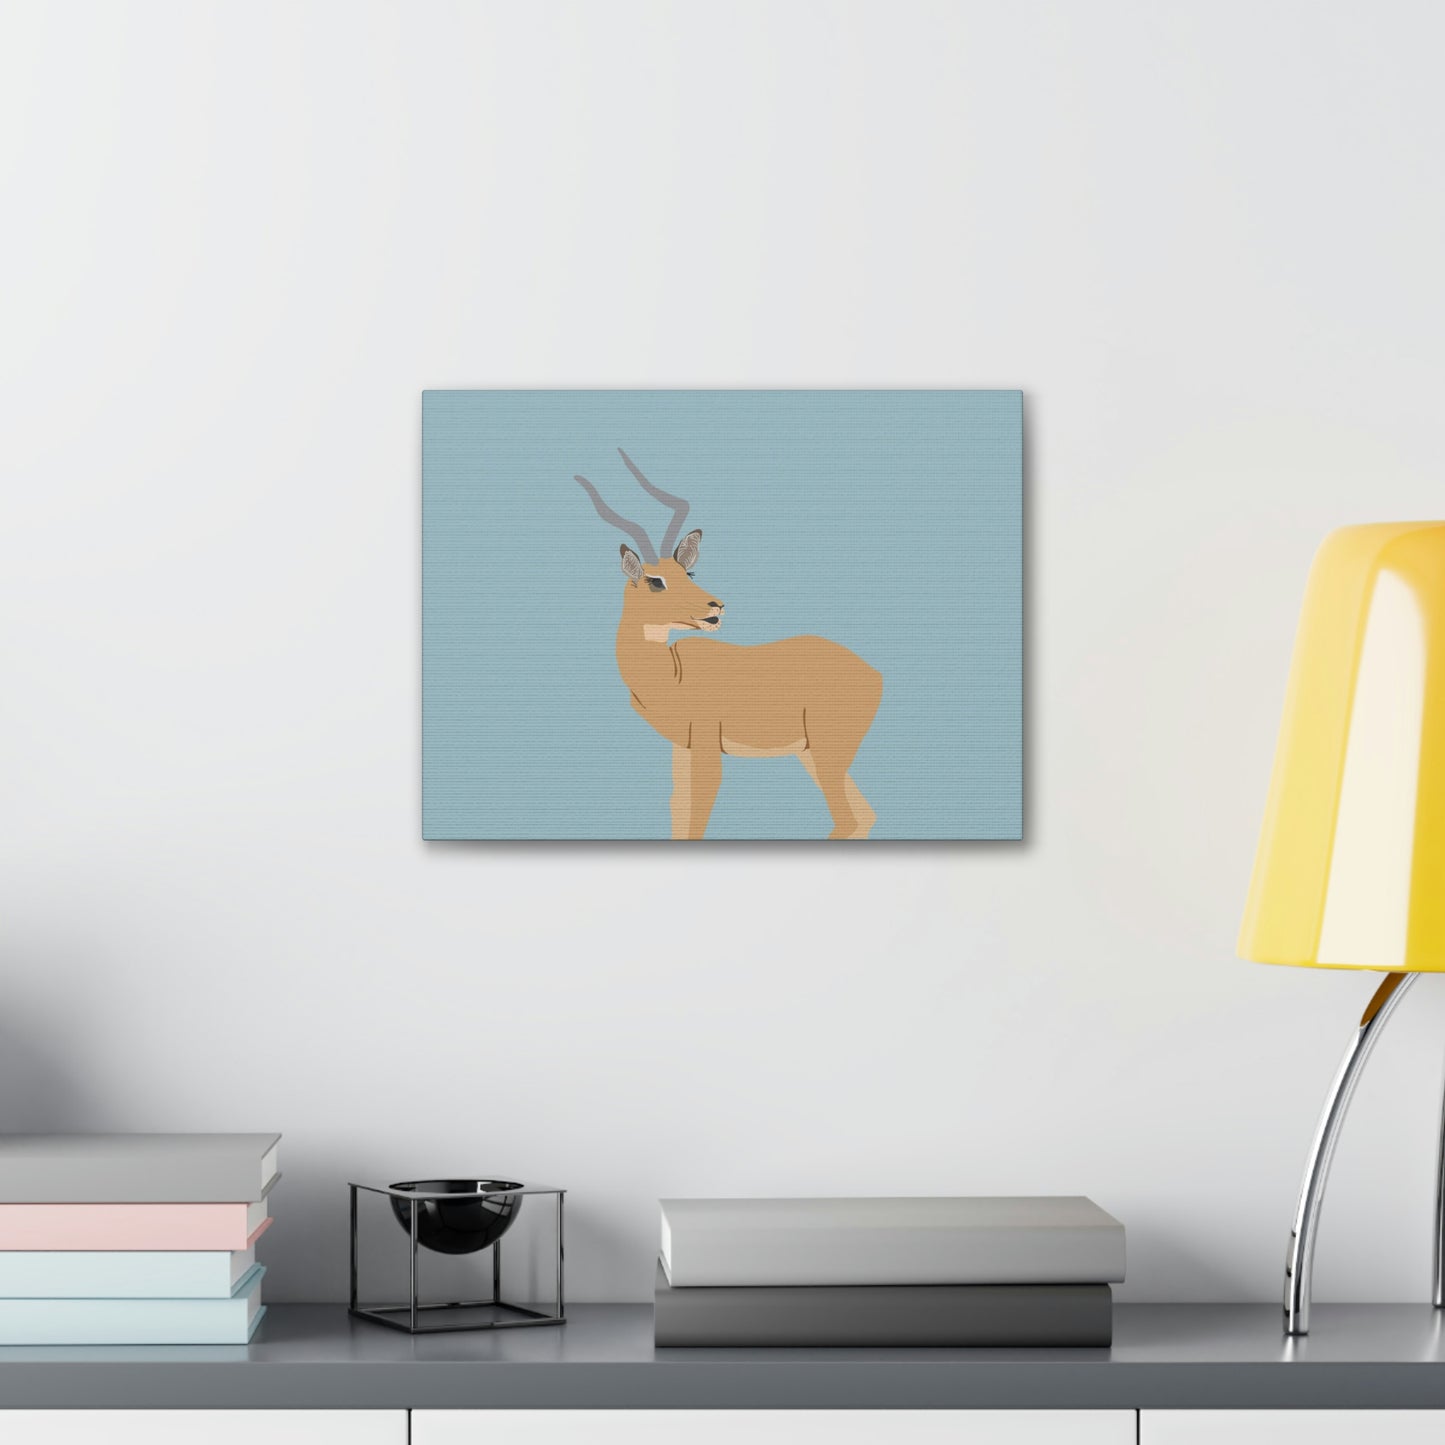 Front Facing View Of Impala Print On White Wall